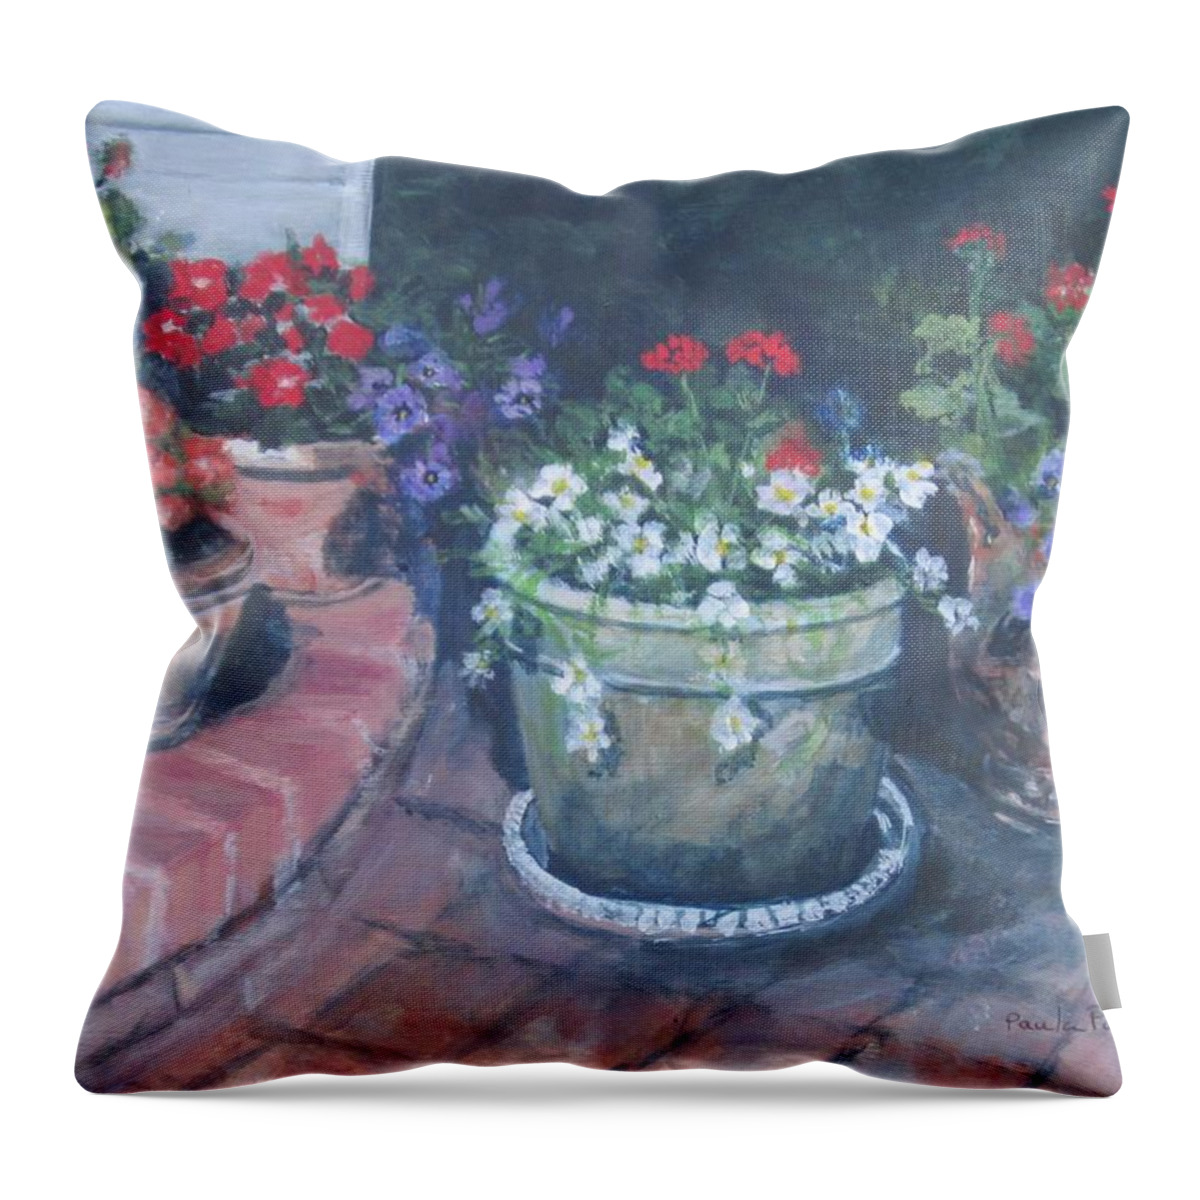 Flowers Throw Pillow featuring the painting Potted Flowers by Paula Pagliughi